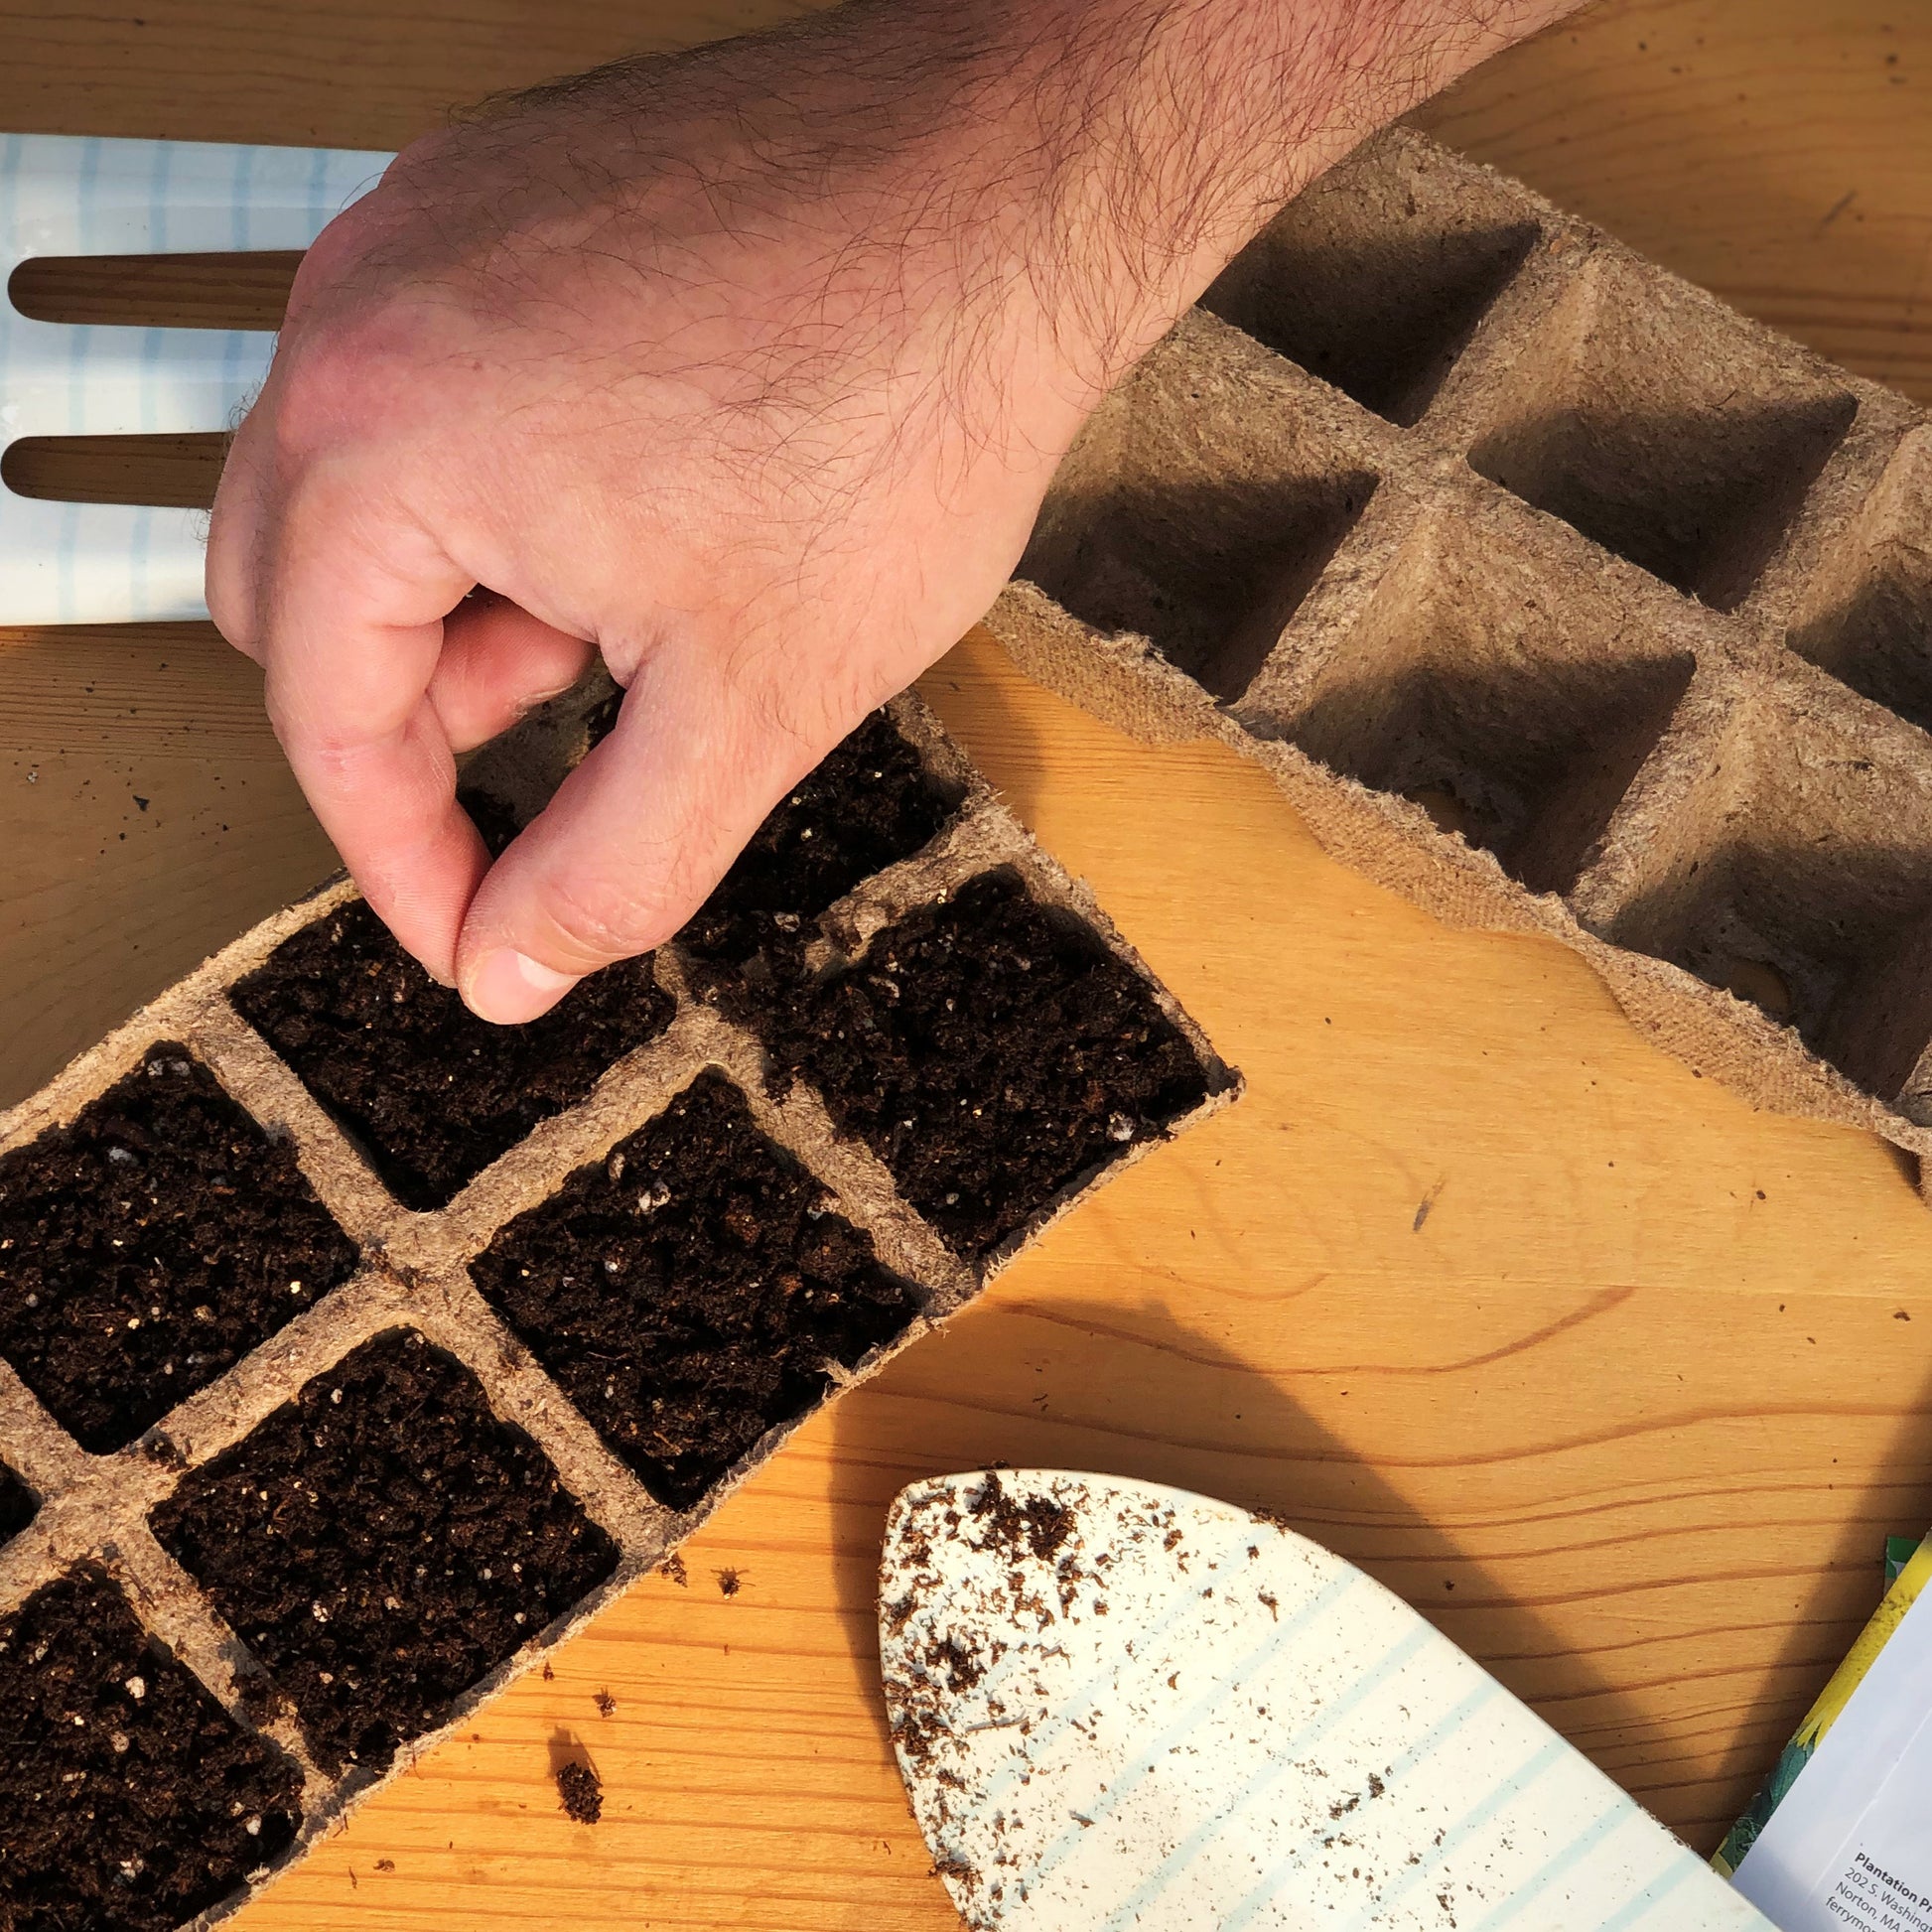 Start Ultra Cool Hybrid Watermelon seeds in biodegradable paper or peat strips.